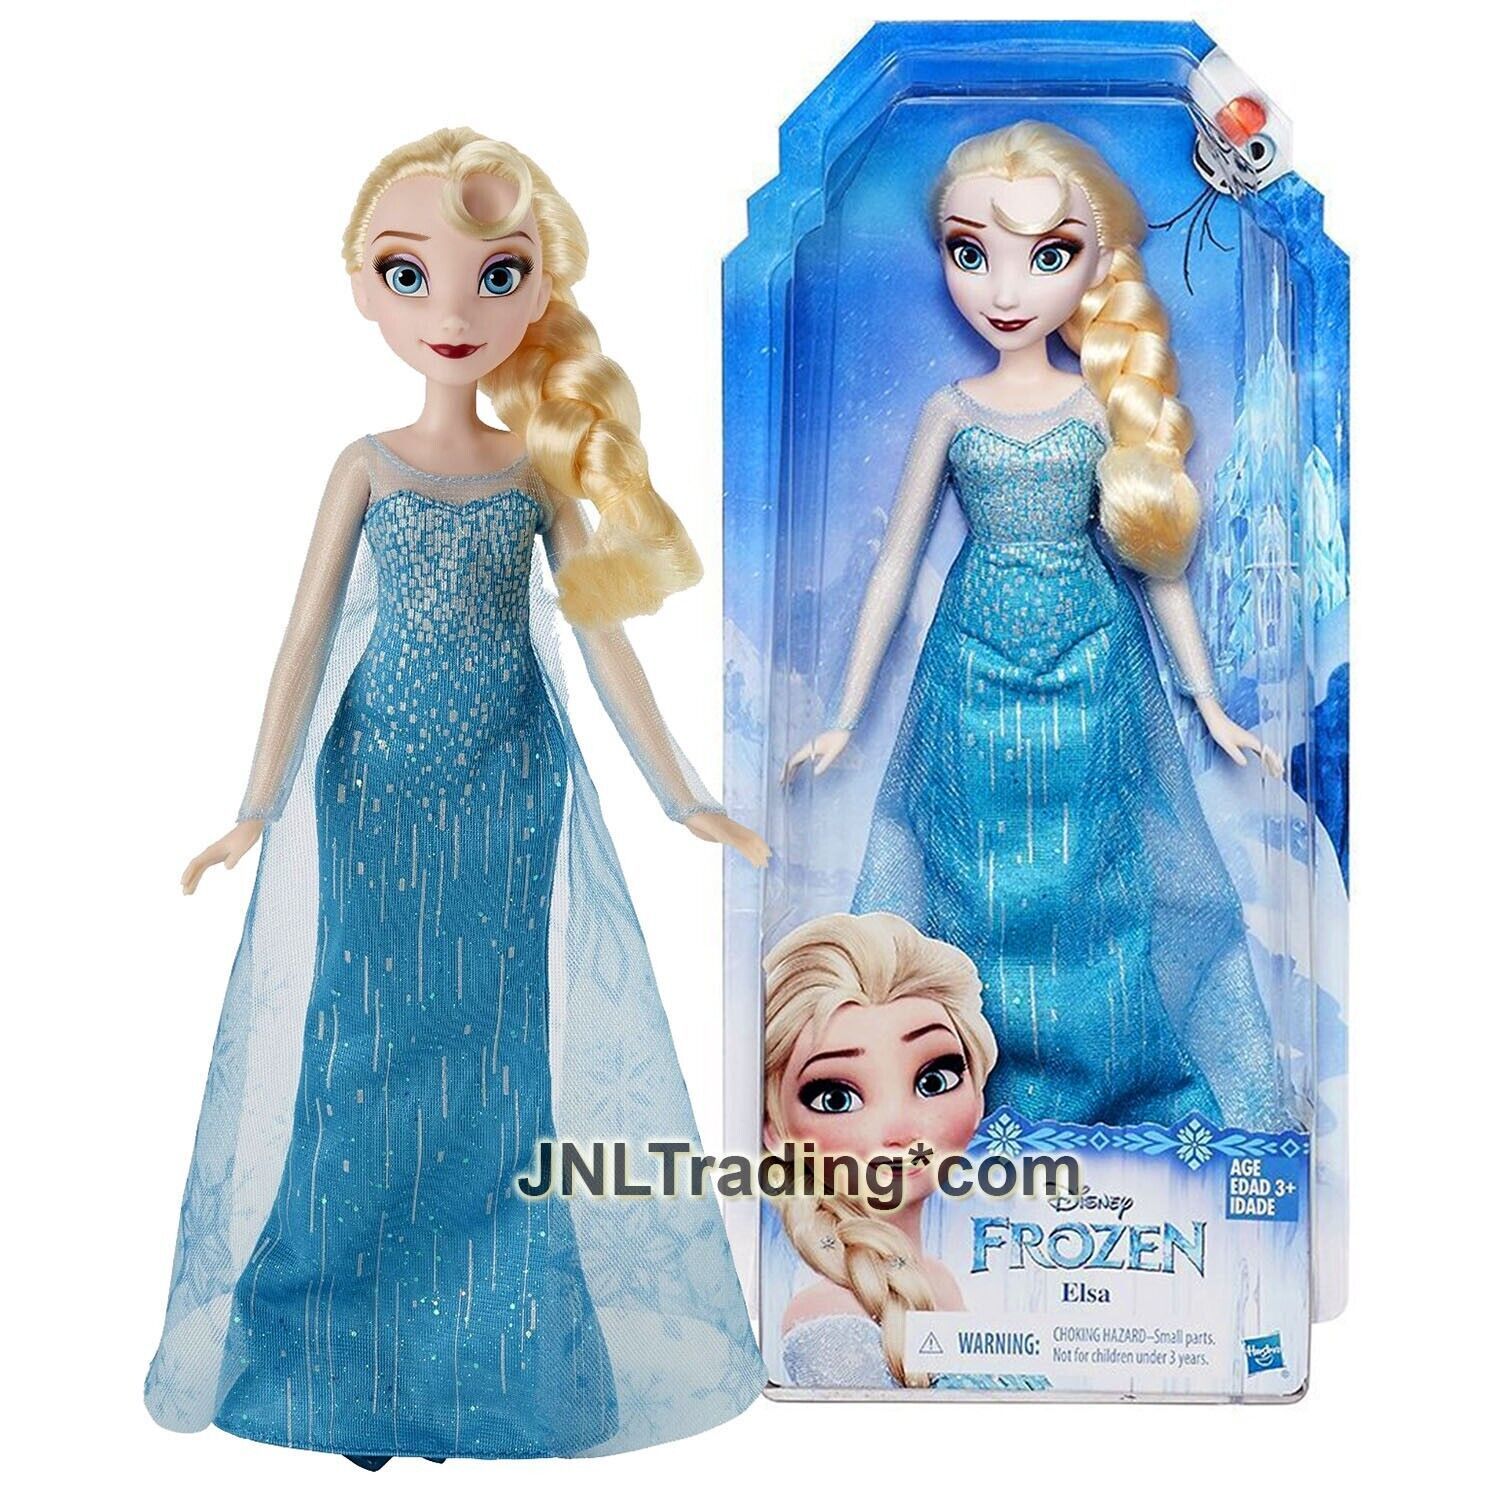 Primary image for Year 2015 Disney Frozen Movie Series 11 Inch Doll Set - ELSA B5161